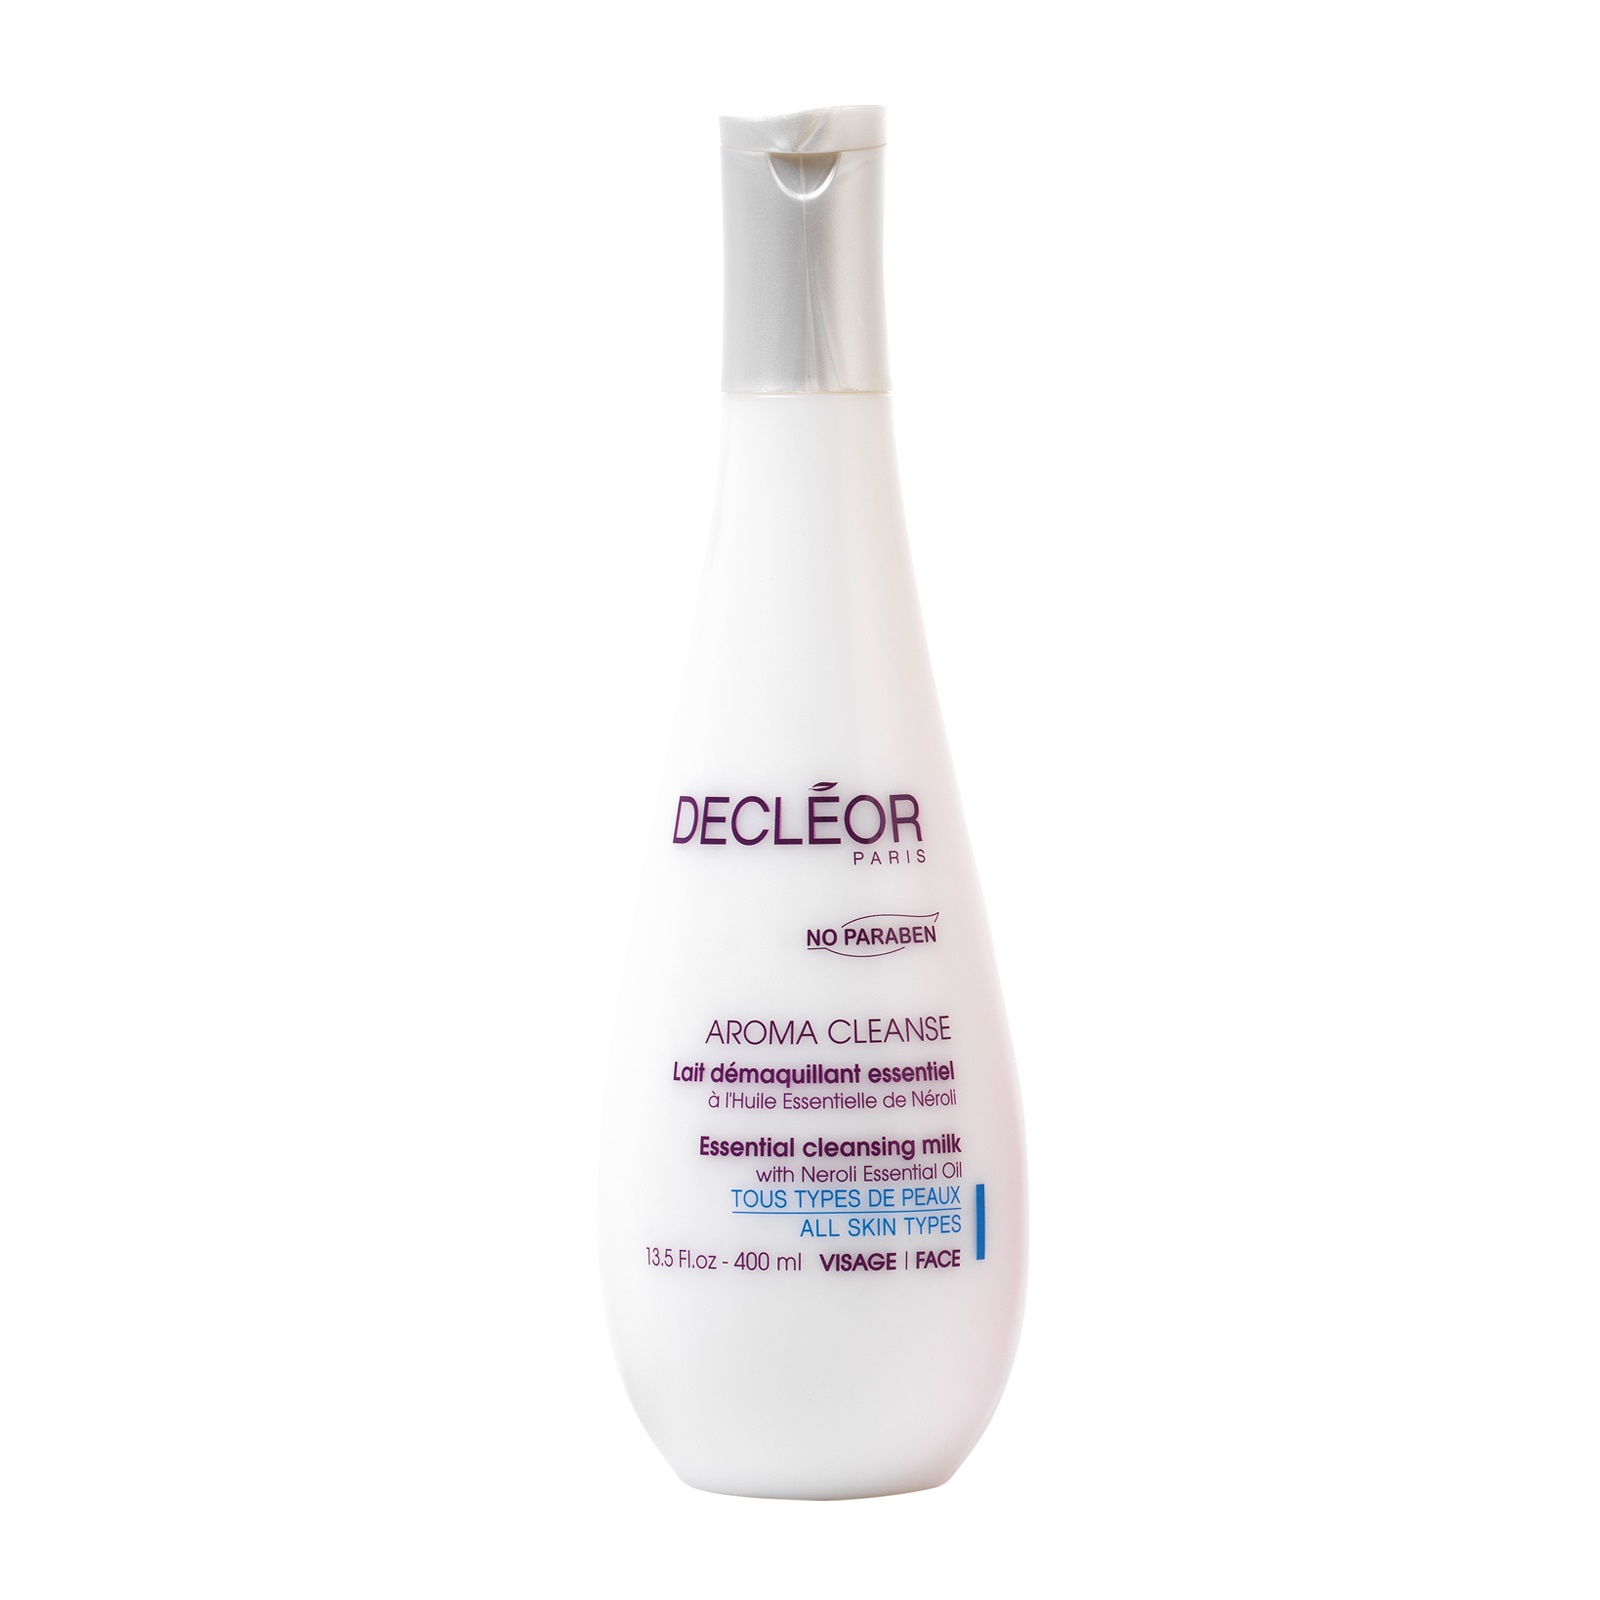 Decleor Aroma Cleanse Essential Cleansing Milk 400ml